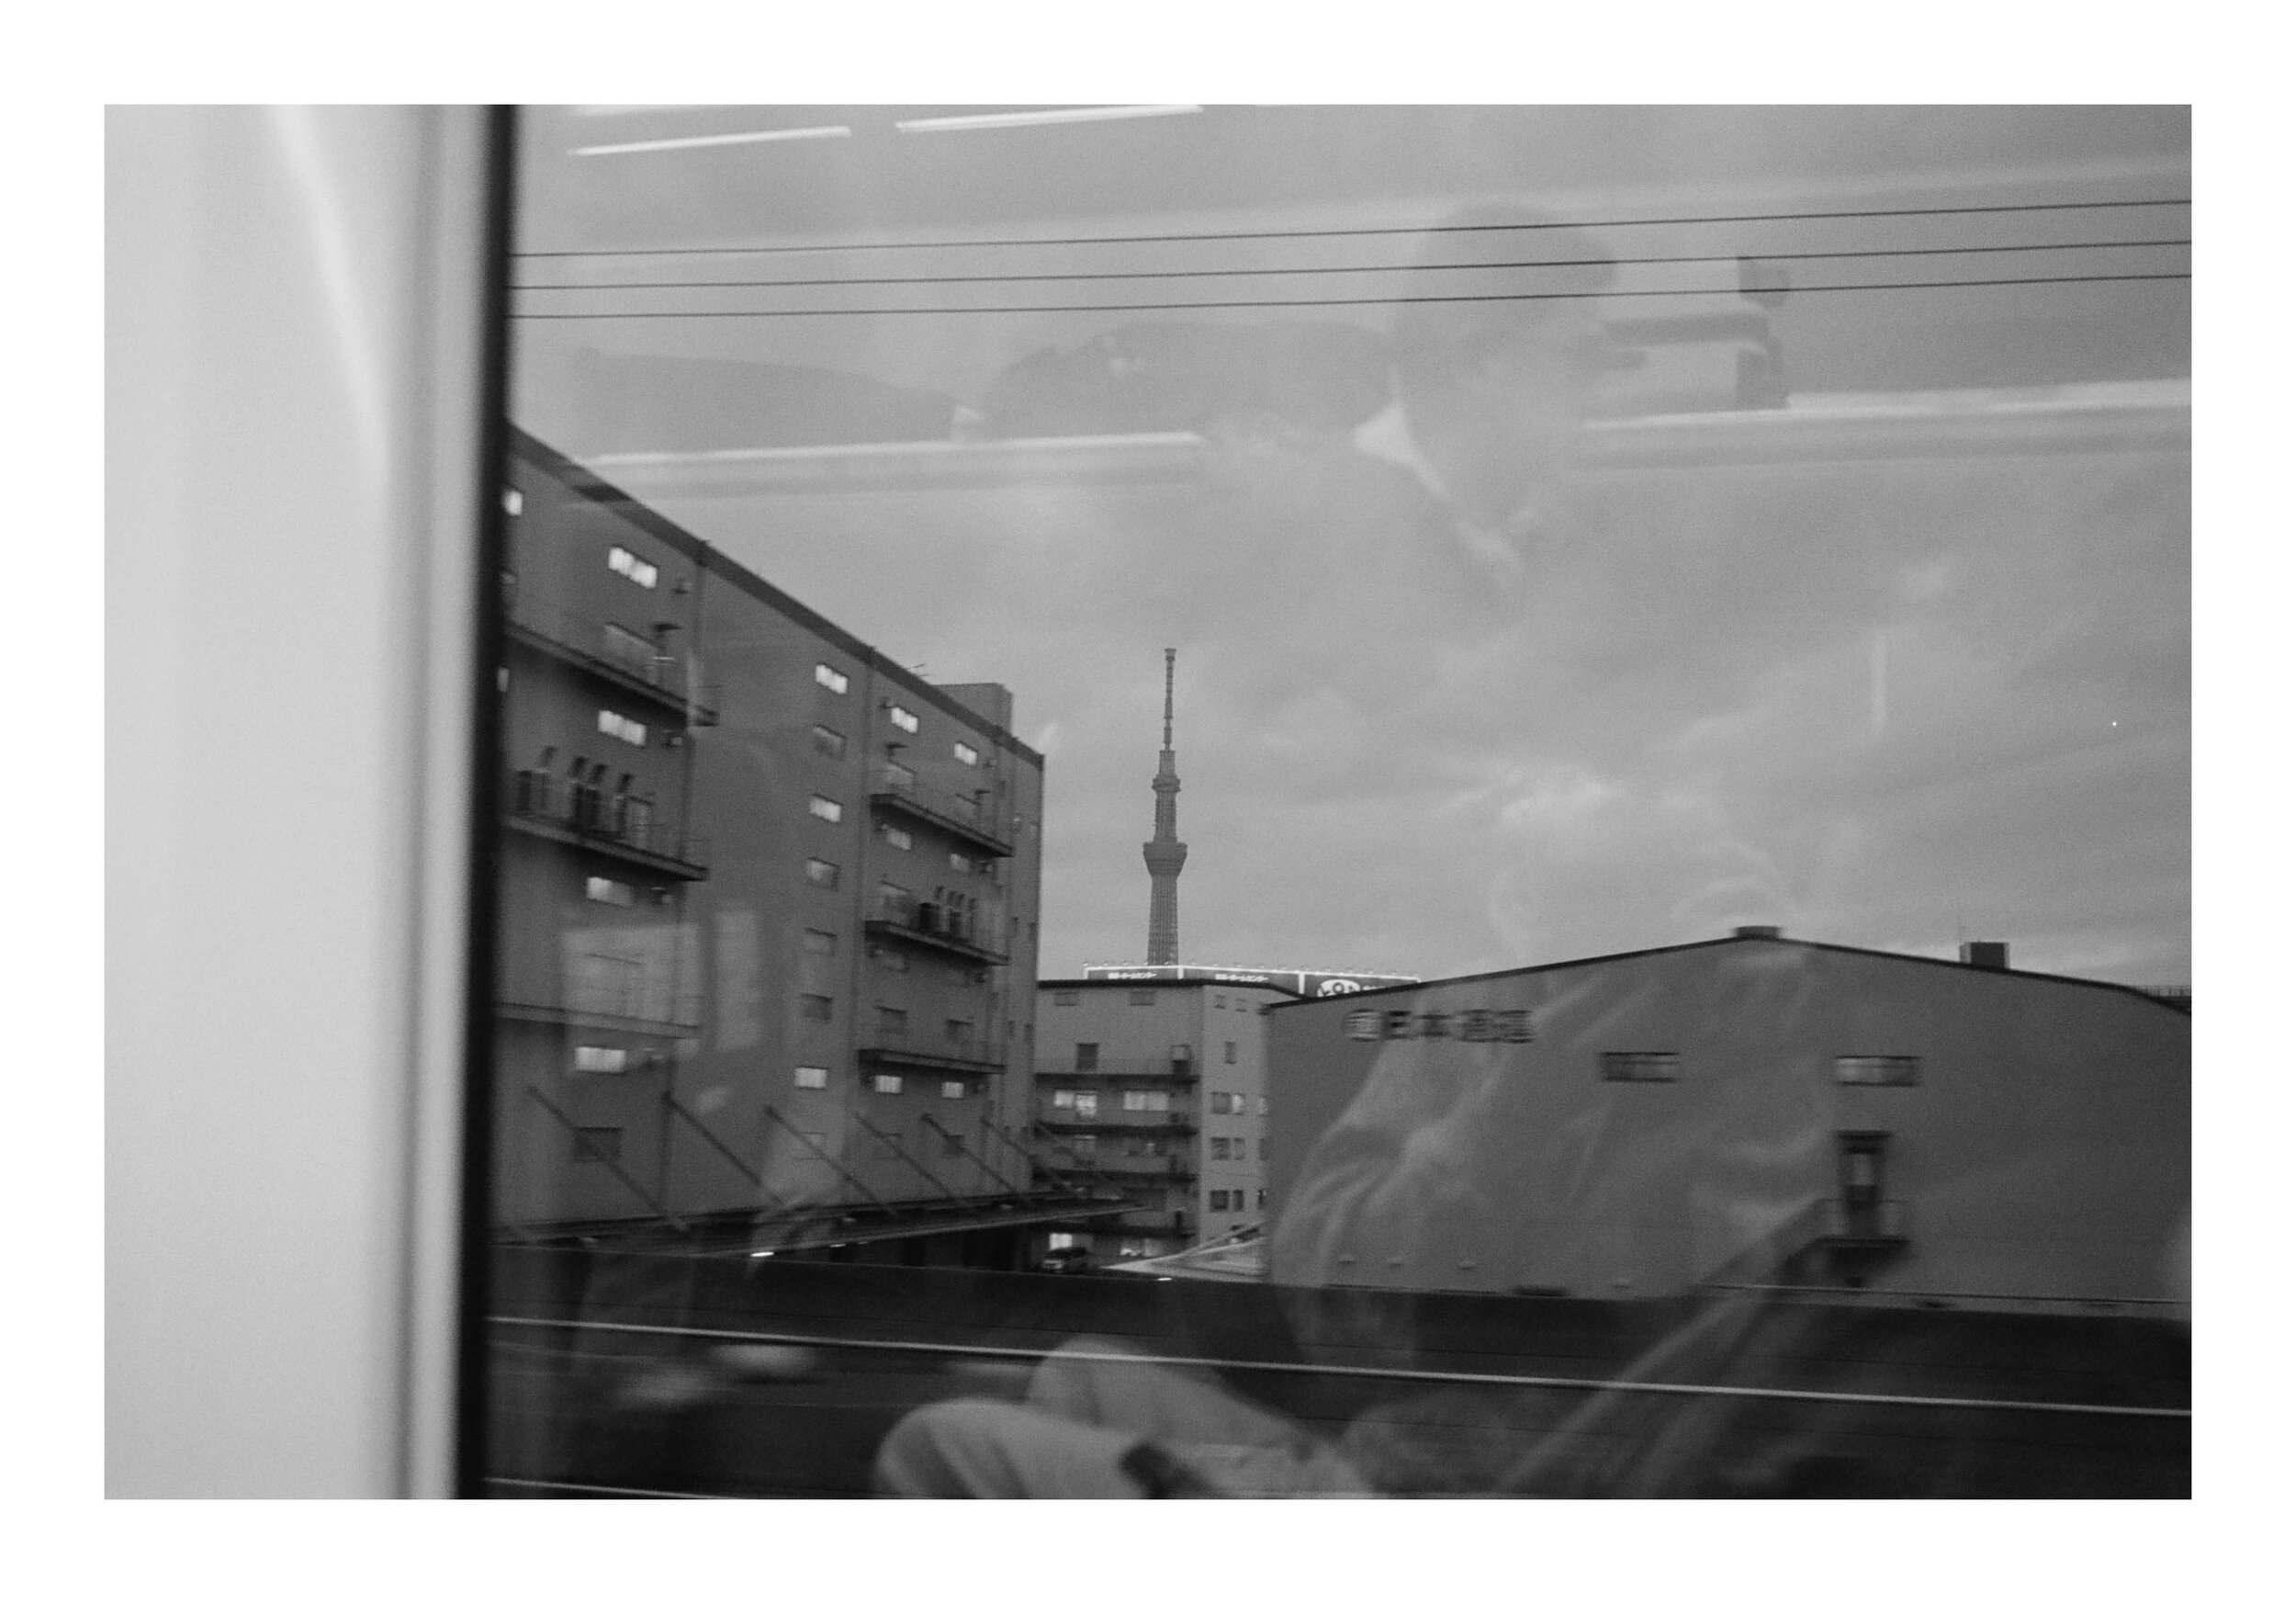  Tokyo Station, 2018 / Thoughts from the Shinkansen is an ongoing personal take from my countrywide travels throughout Japan via the Japanese railway system. Focusing on class and structure, photographed on black and white 35mm film. 